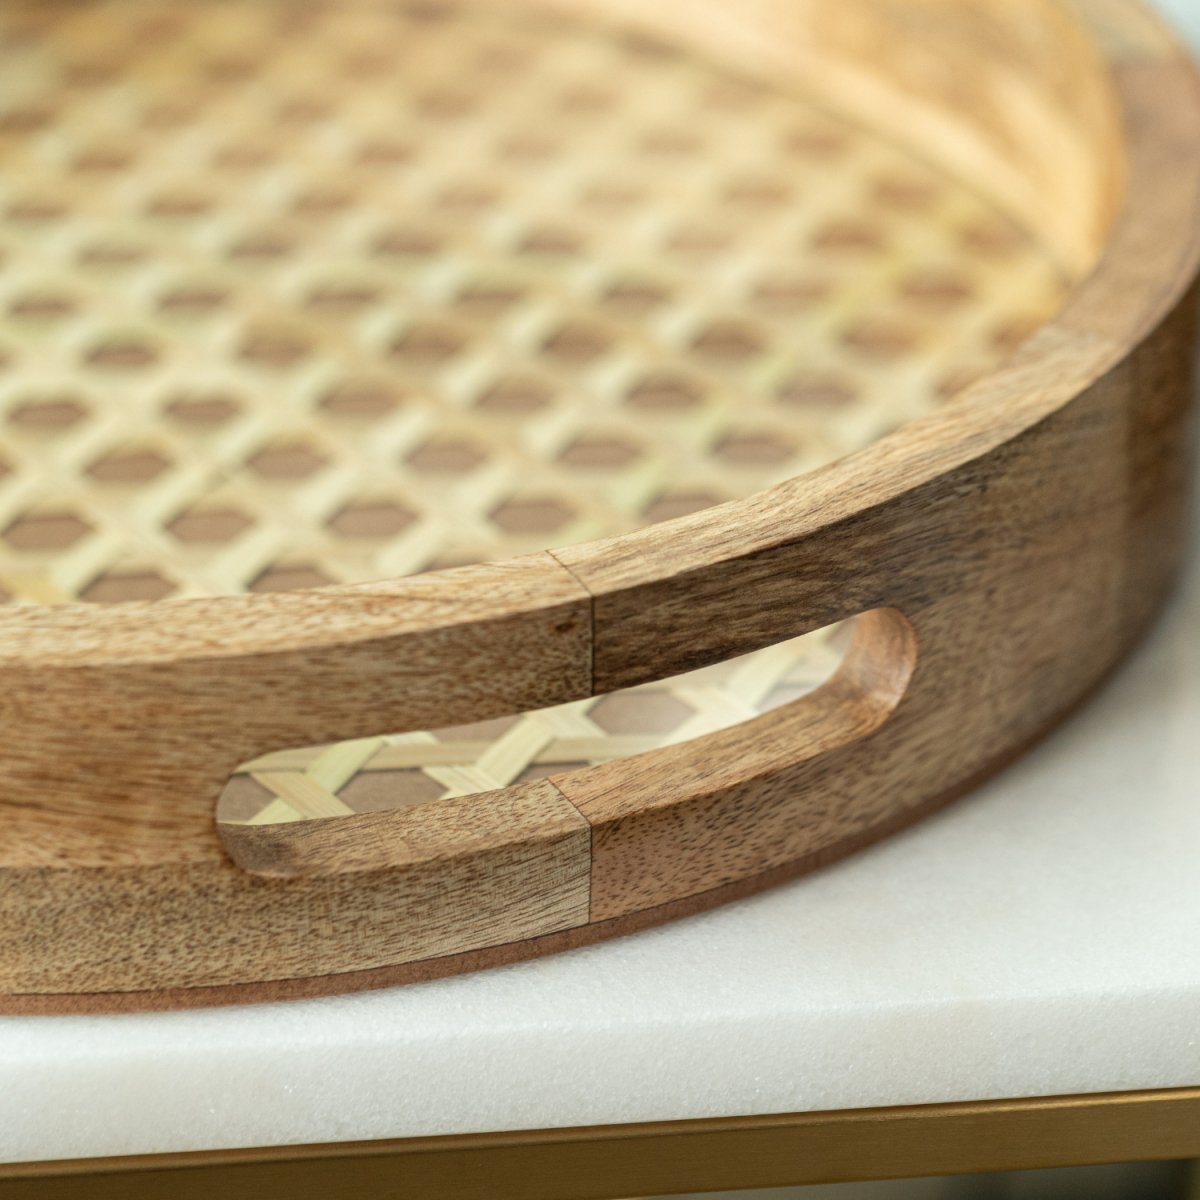 Round Wooden Tray with Rattan Mat & Glass base - Aesthetic Living